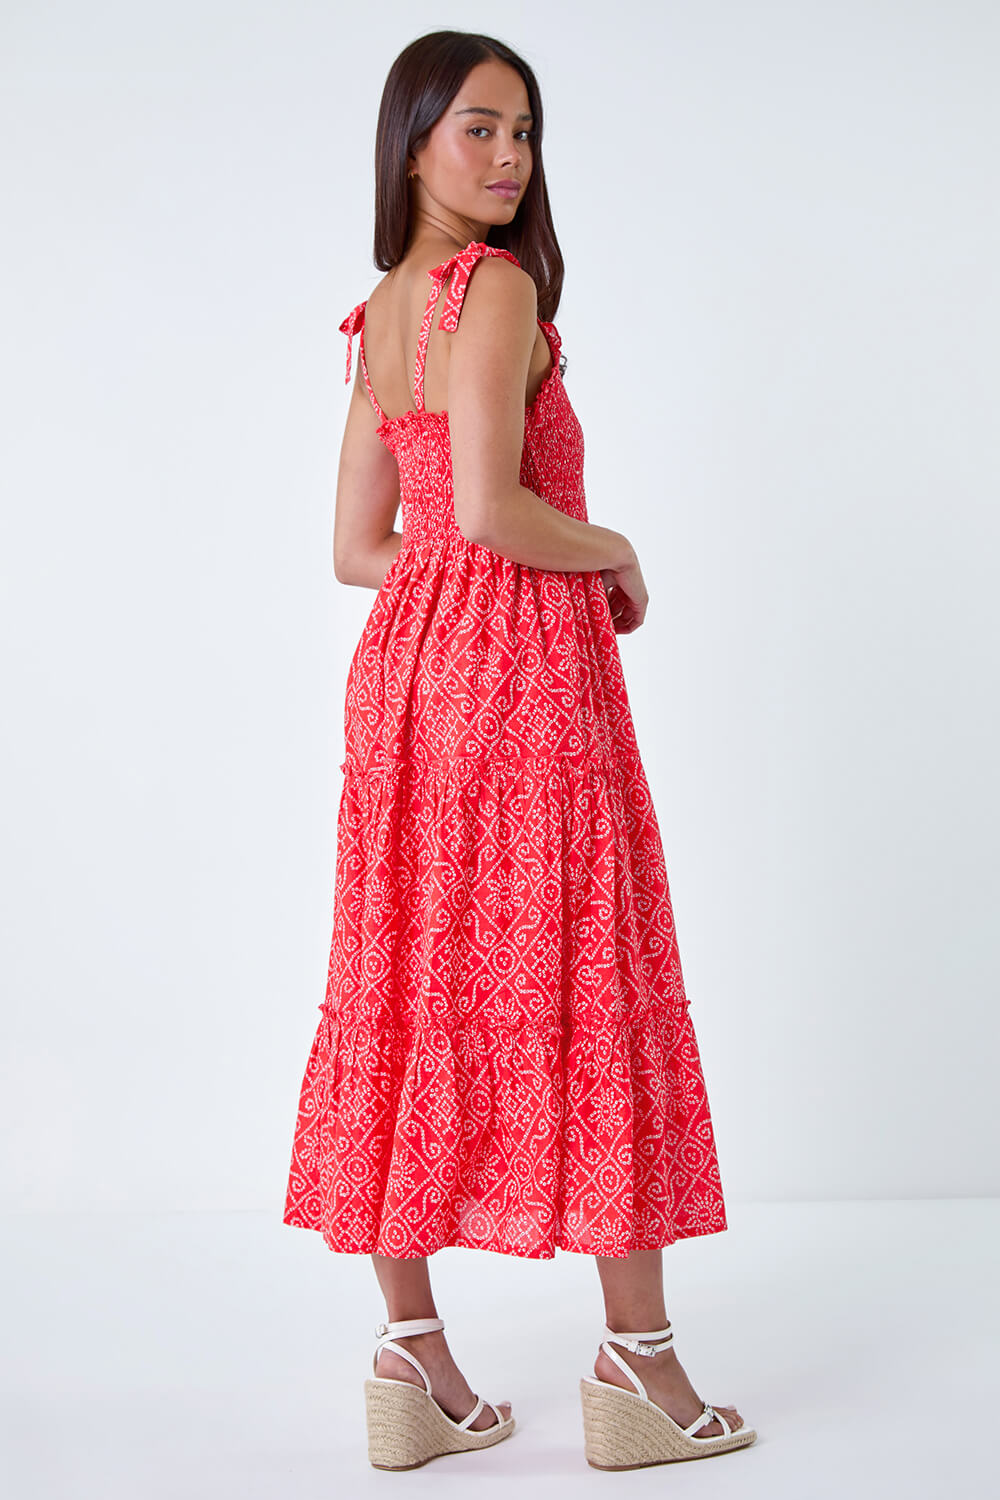 CORAL Petite Cotton Ditsy Print Shirred Maxi Dress, Image 3 of 5